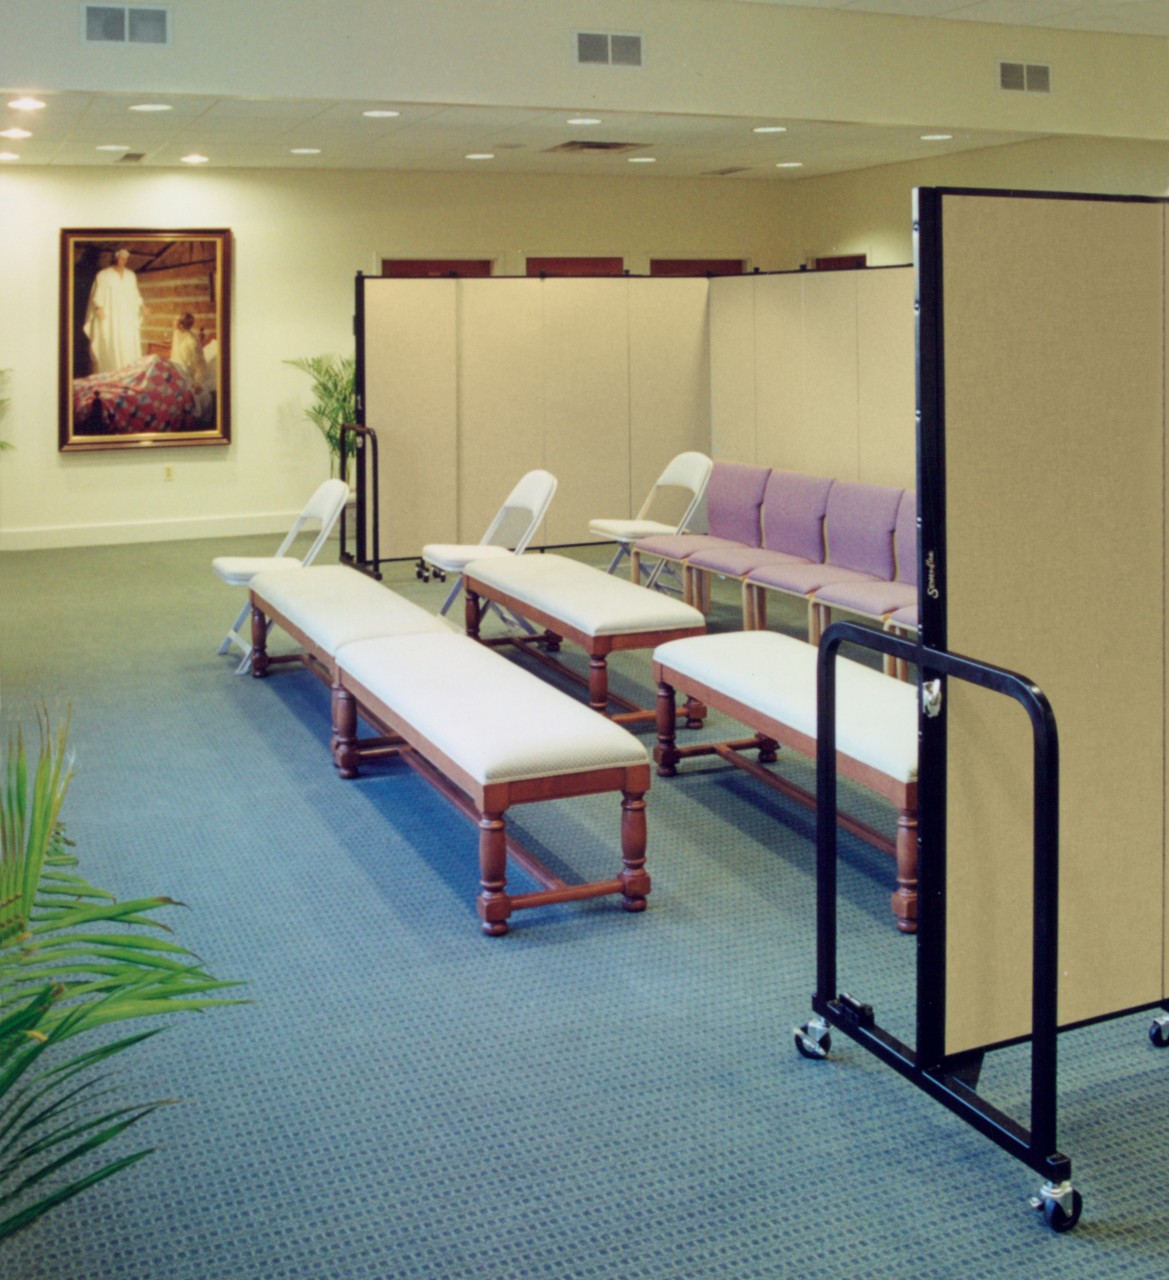 A row of chairs follows two rows of benches in a prayer room that are shielded by a set of room dividers